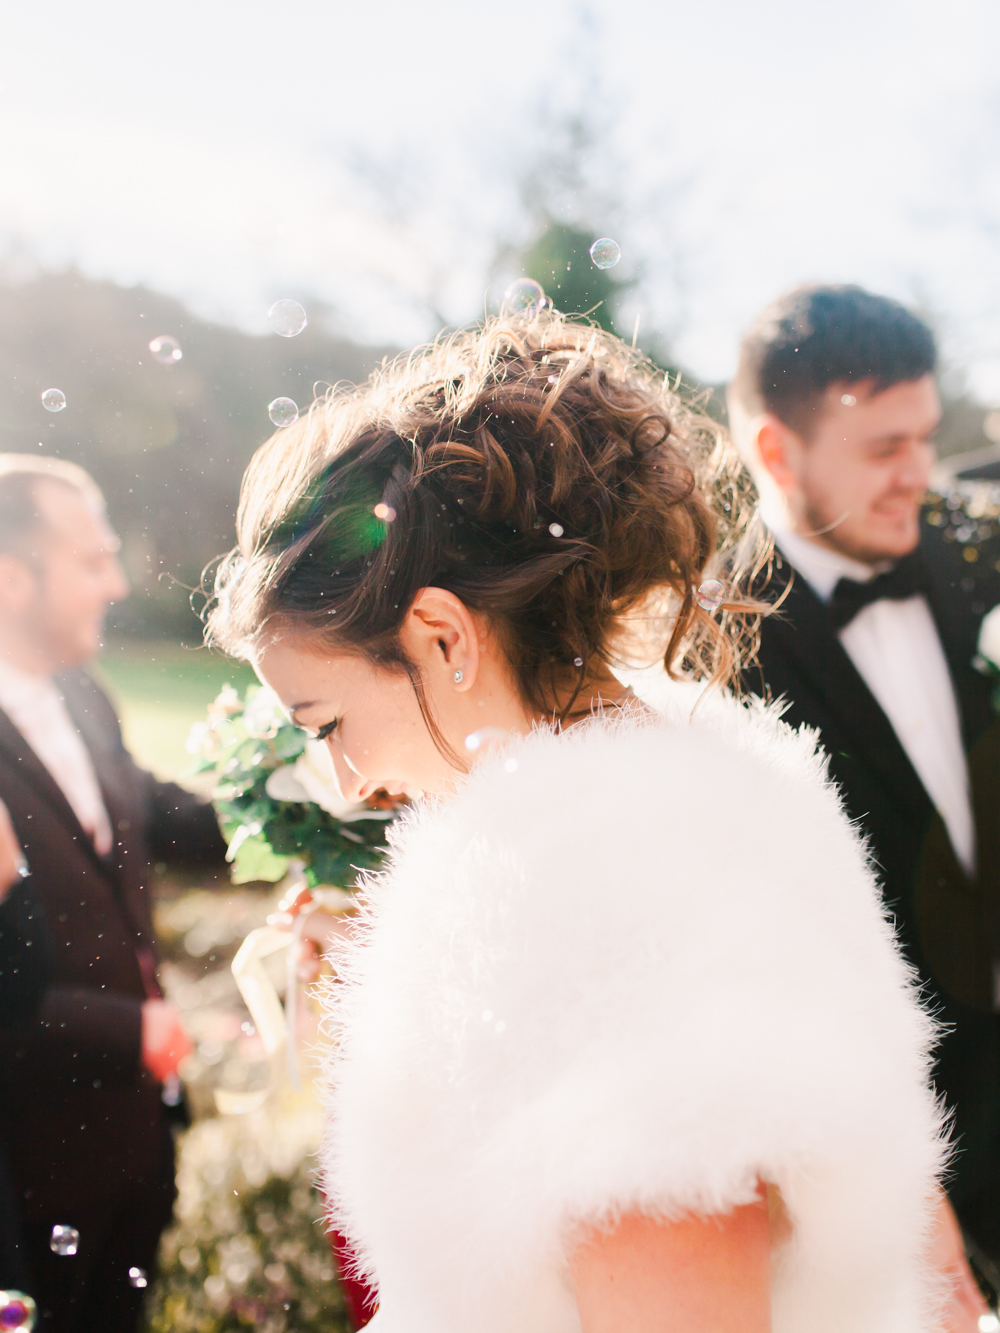 The bride walks through bubbles being blown by guests in the winter sunshine